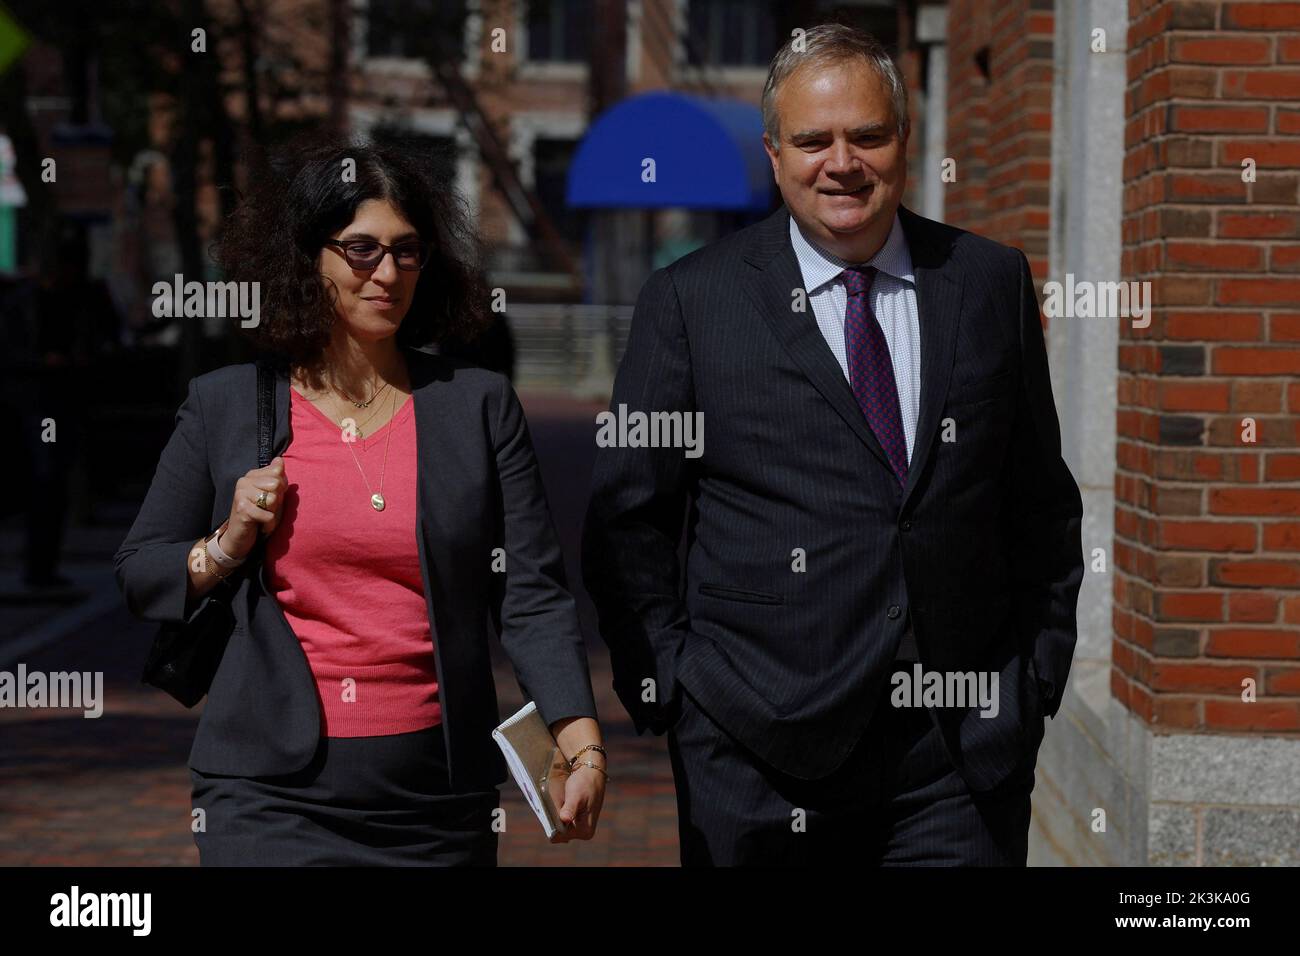 Robin Hayes, CEO of Jet Blue, arrives at the federal courthouse to testify in an antitrust lawsuit seeking to unwind the 'Northeast Alliance' partnership between American Airlines and JetBlue Airways Corp, in Boston, Massachusetts, U.S., September 27, 2022. REUTERS/Brian Snyder Stock Photo